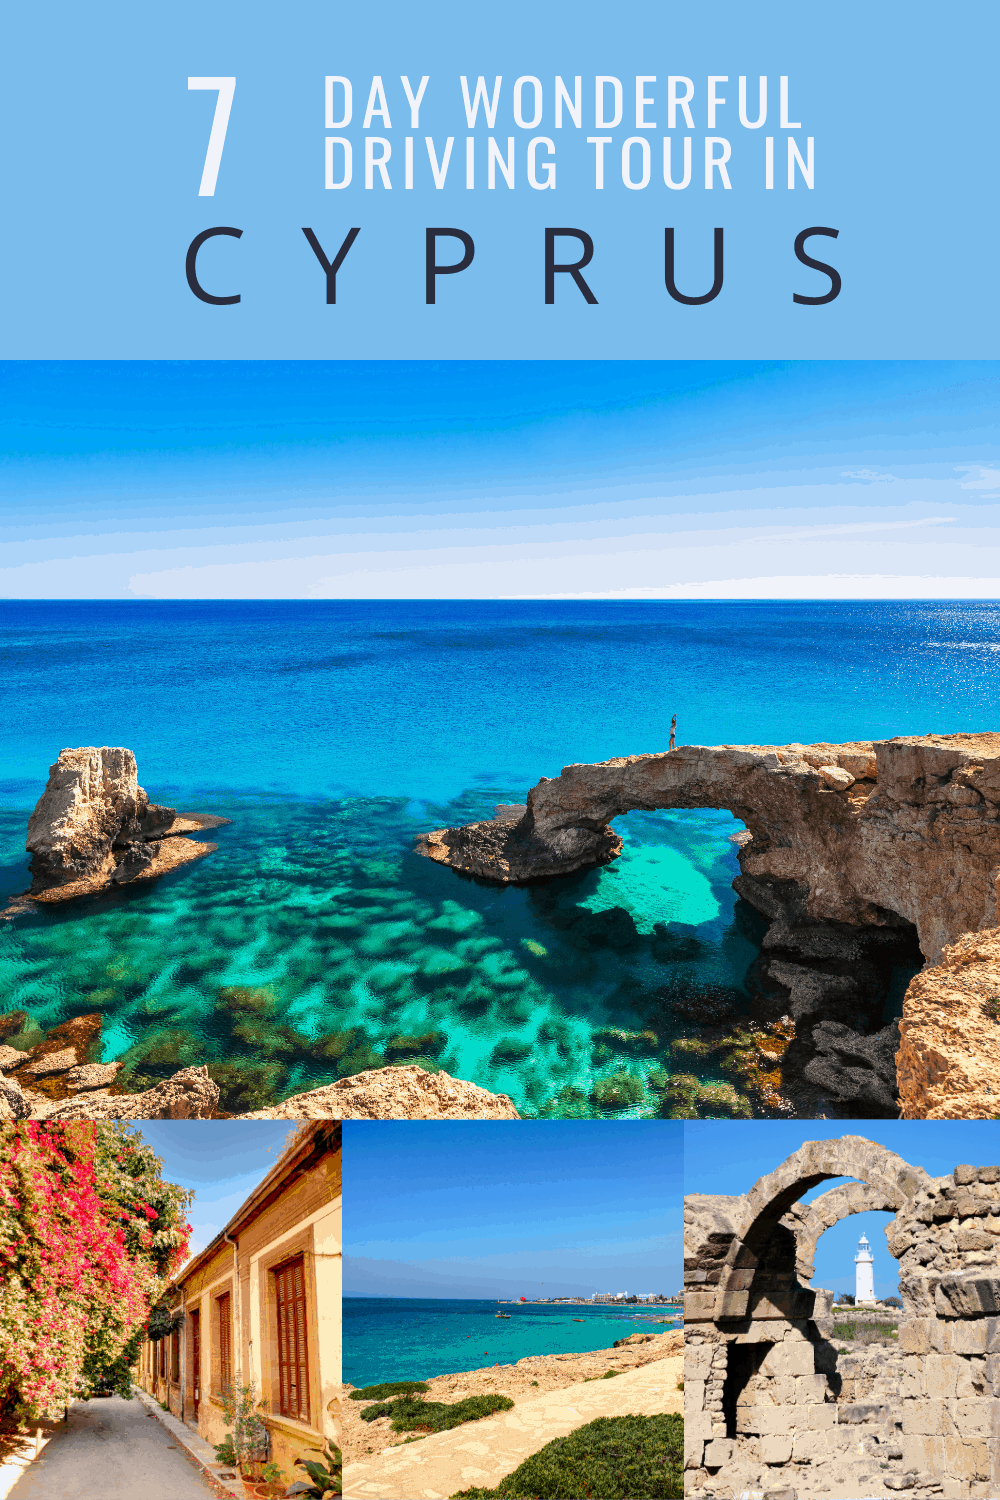 natural bridge at Ayia Napa beach cyprus text says 7 day amazing driving tour in cyprus